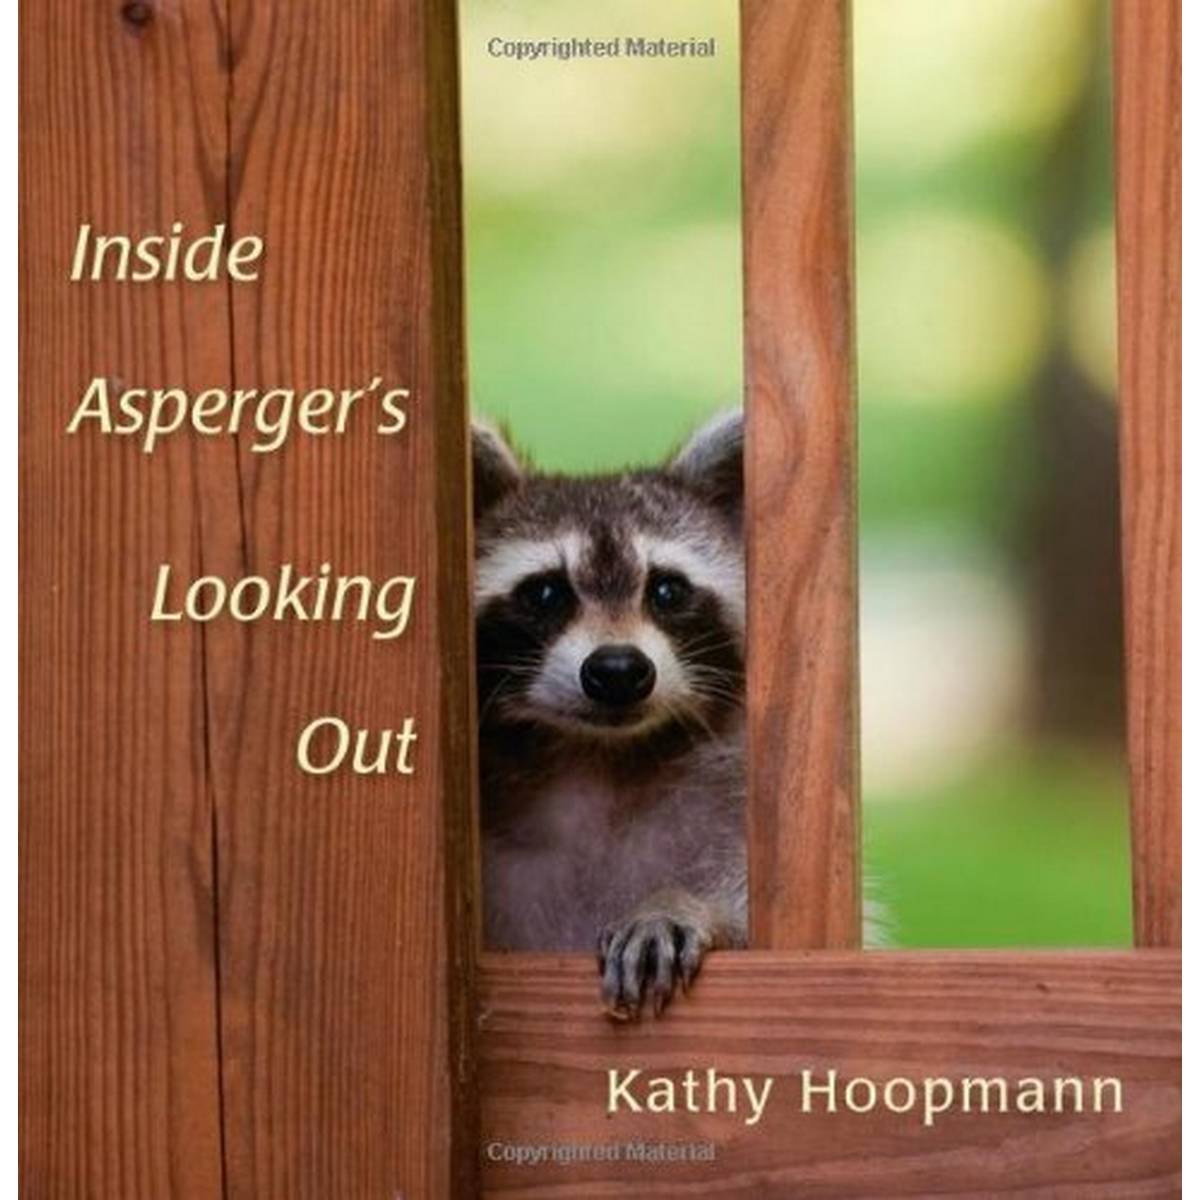 Inside Asperger's Looking Out